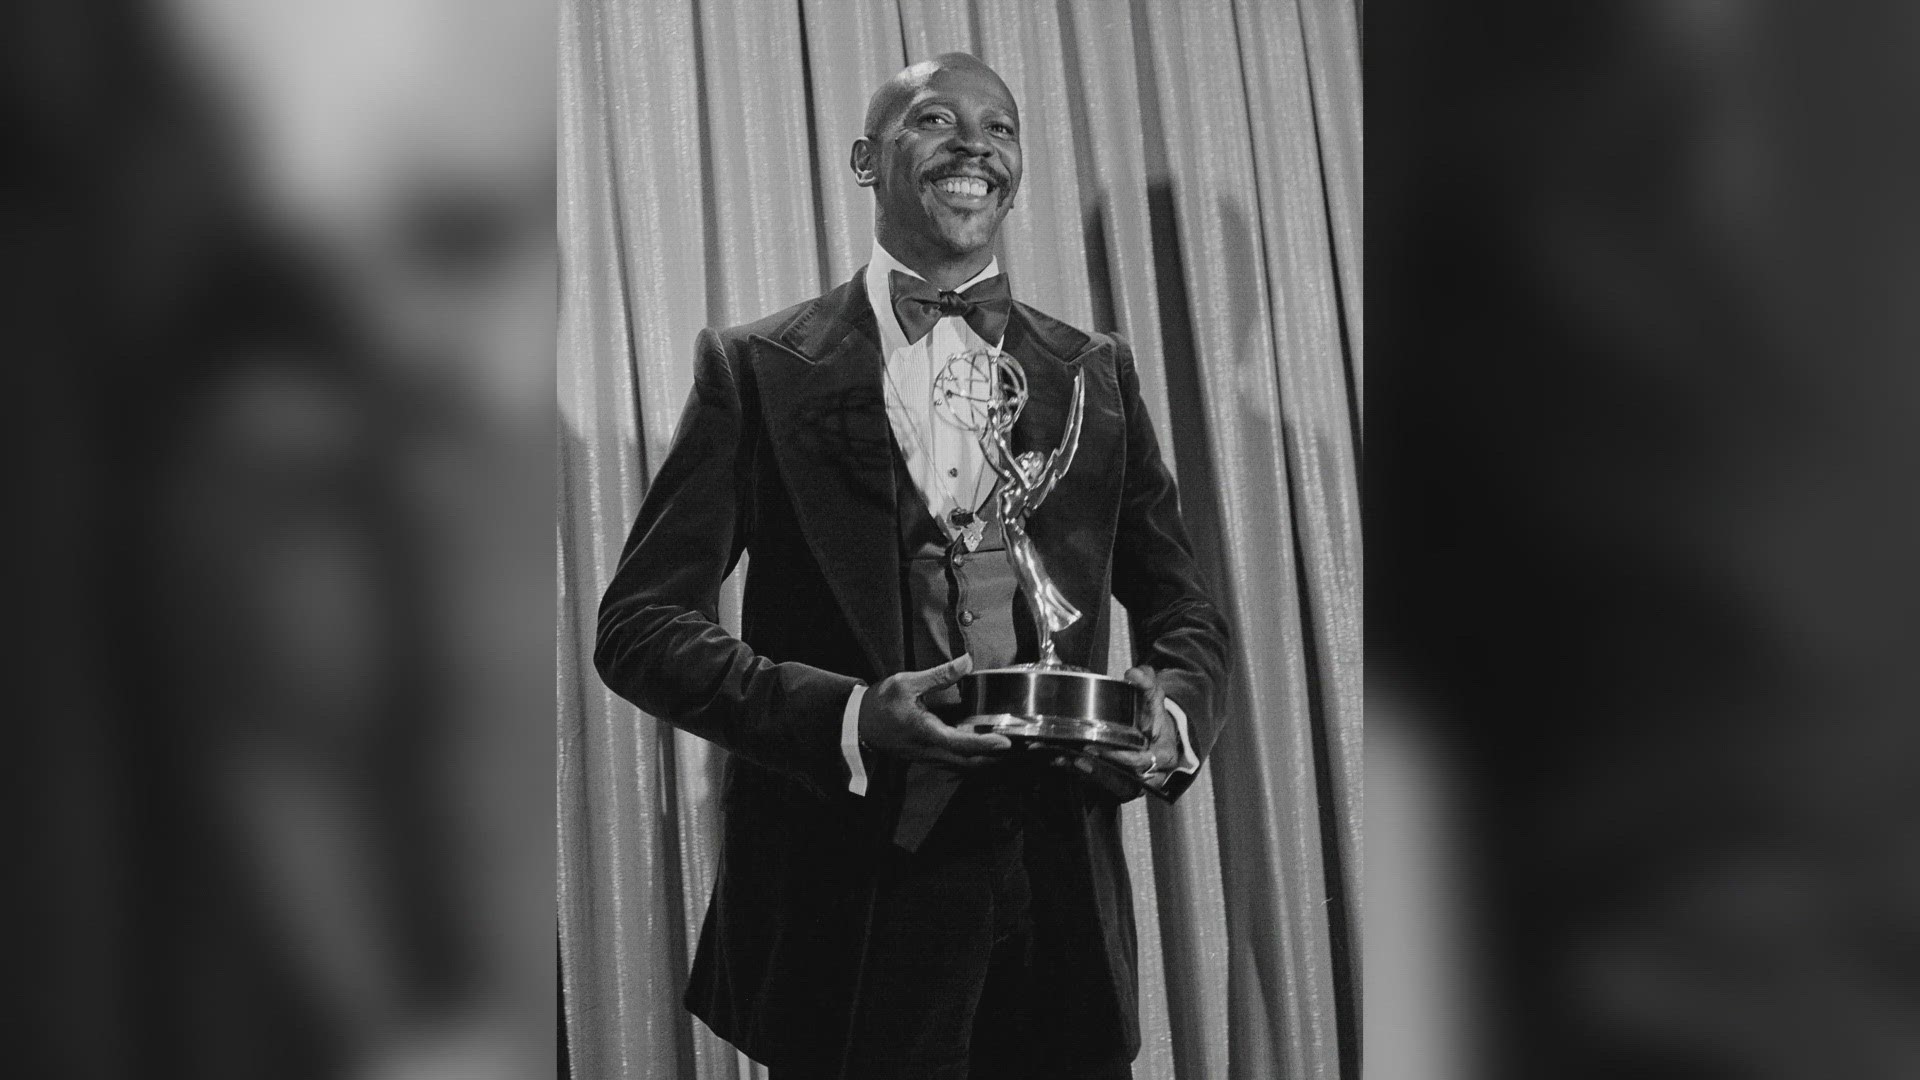 Gossett was the first Black man to win Best Supporting Actor for the 1982 film 'An Officer and a Gentleman,' he won an Emmy for his role in the miniseries 'Roots.